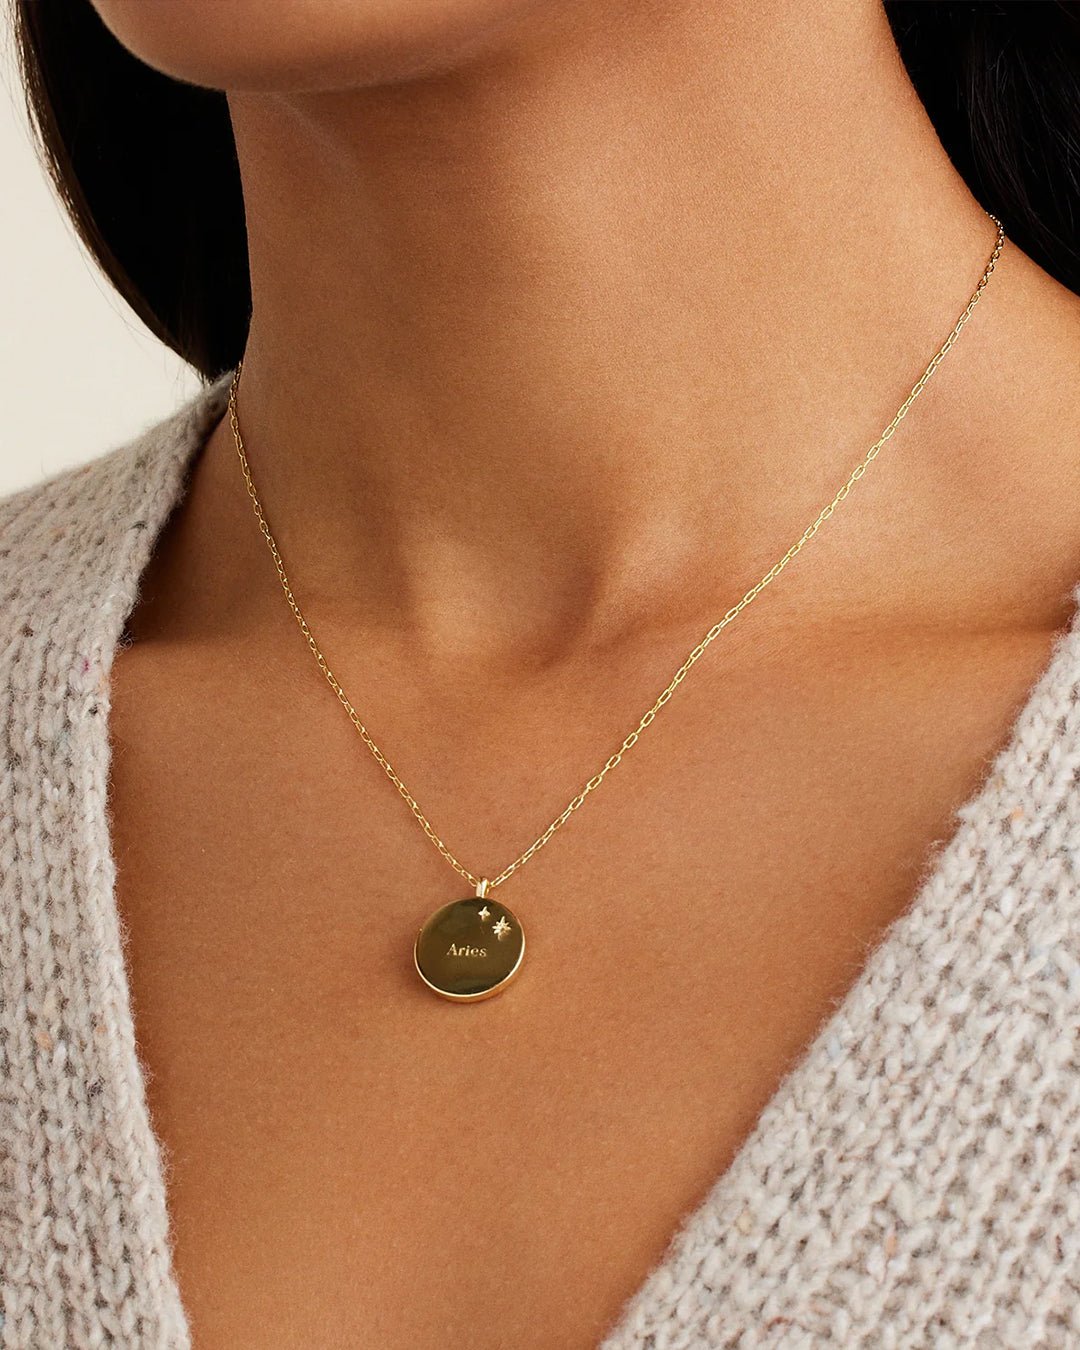 Zodiac Necklace - Aries,  Astrology Coin Necklace,  Aries Necklace   || option::Gold Plated, Aries